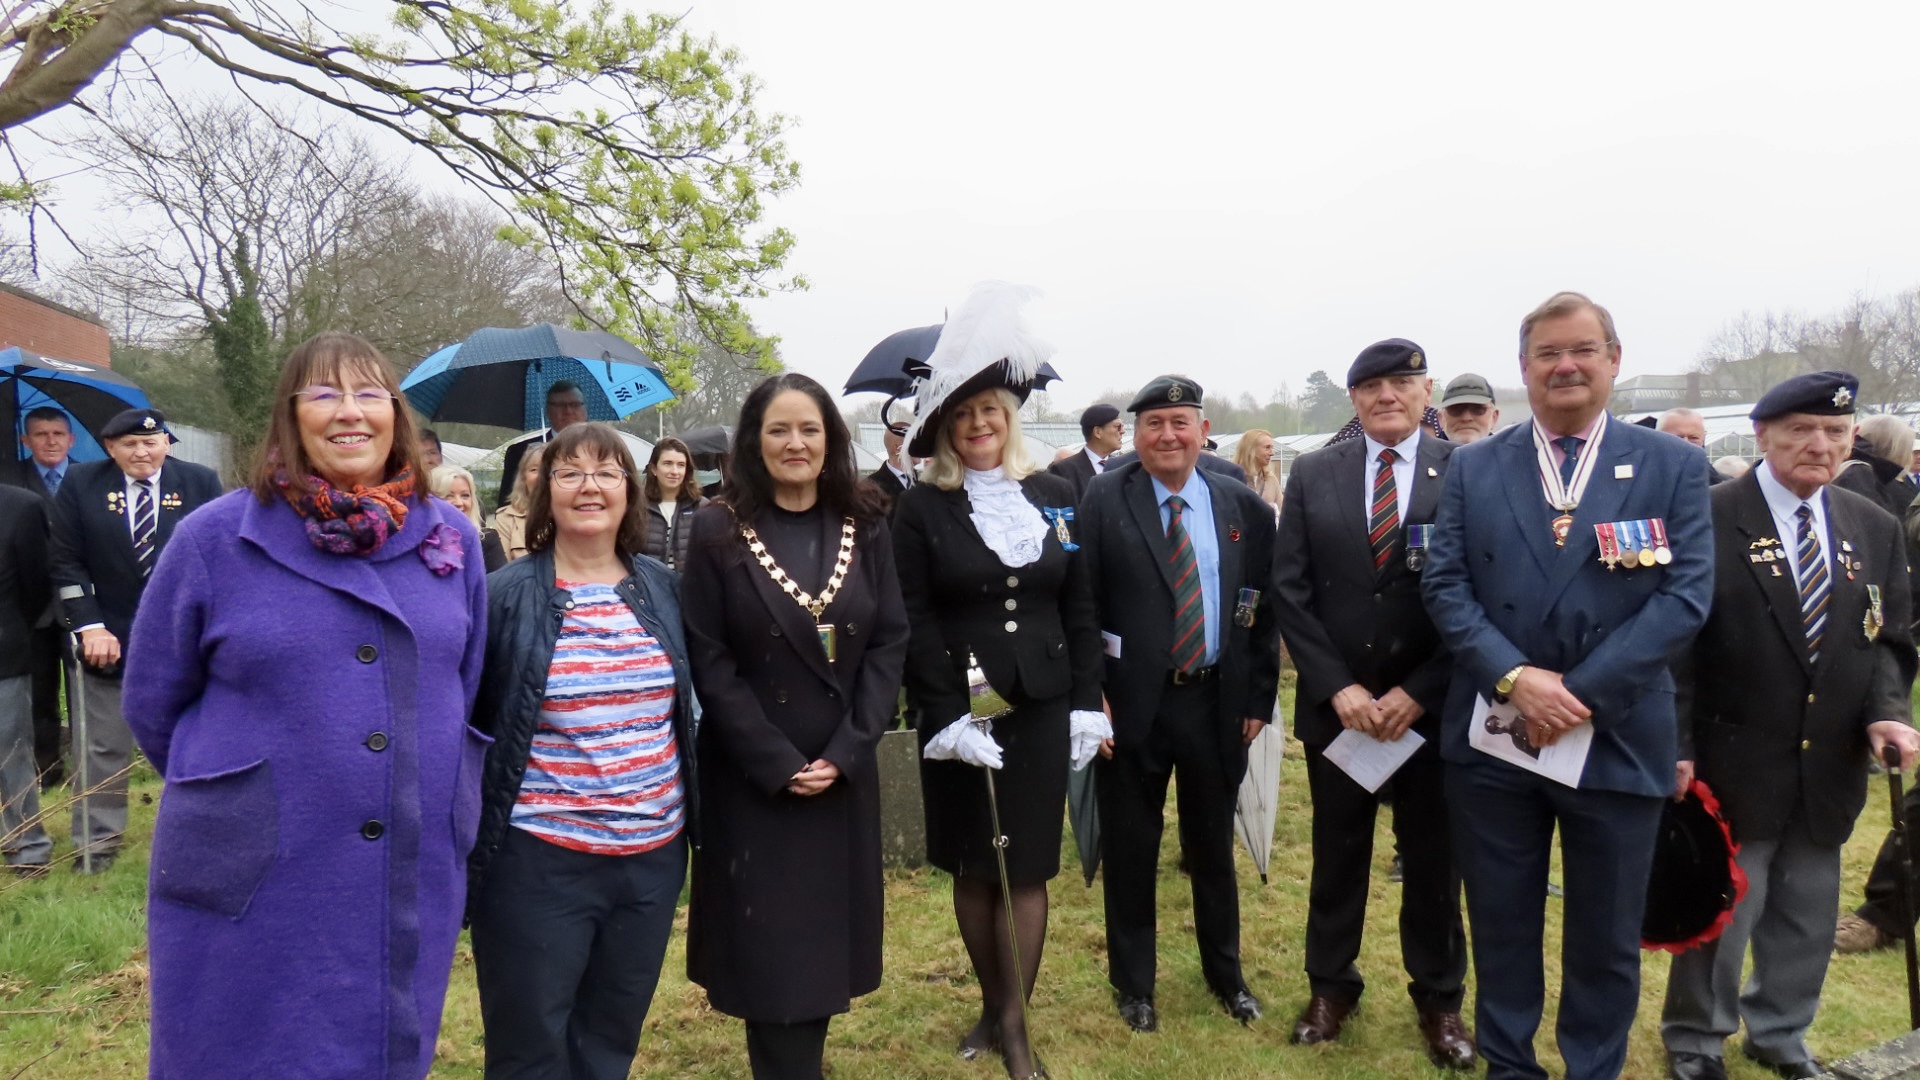 Crowds paid their respects as a new headstone was unveiled in tribute to Private Richard George Masters, from Southport, who was awarded a Victoria Cross when he saved the lives of 200 wounded British Army soldiers on 9th April 1918 during World War One. Judy Masters (left) and Joanne Rich (second left) with Mayor of Sefton Cllt Clare Carragher (third left), High Sheriff of Merseyside Lesley Martin-Wright (fourth left), event organiser Rolan Sutton (fifth left), and other dignitaries. Photo by Andrew Brown Stand Up For Southport